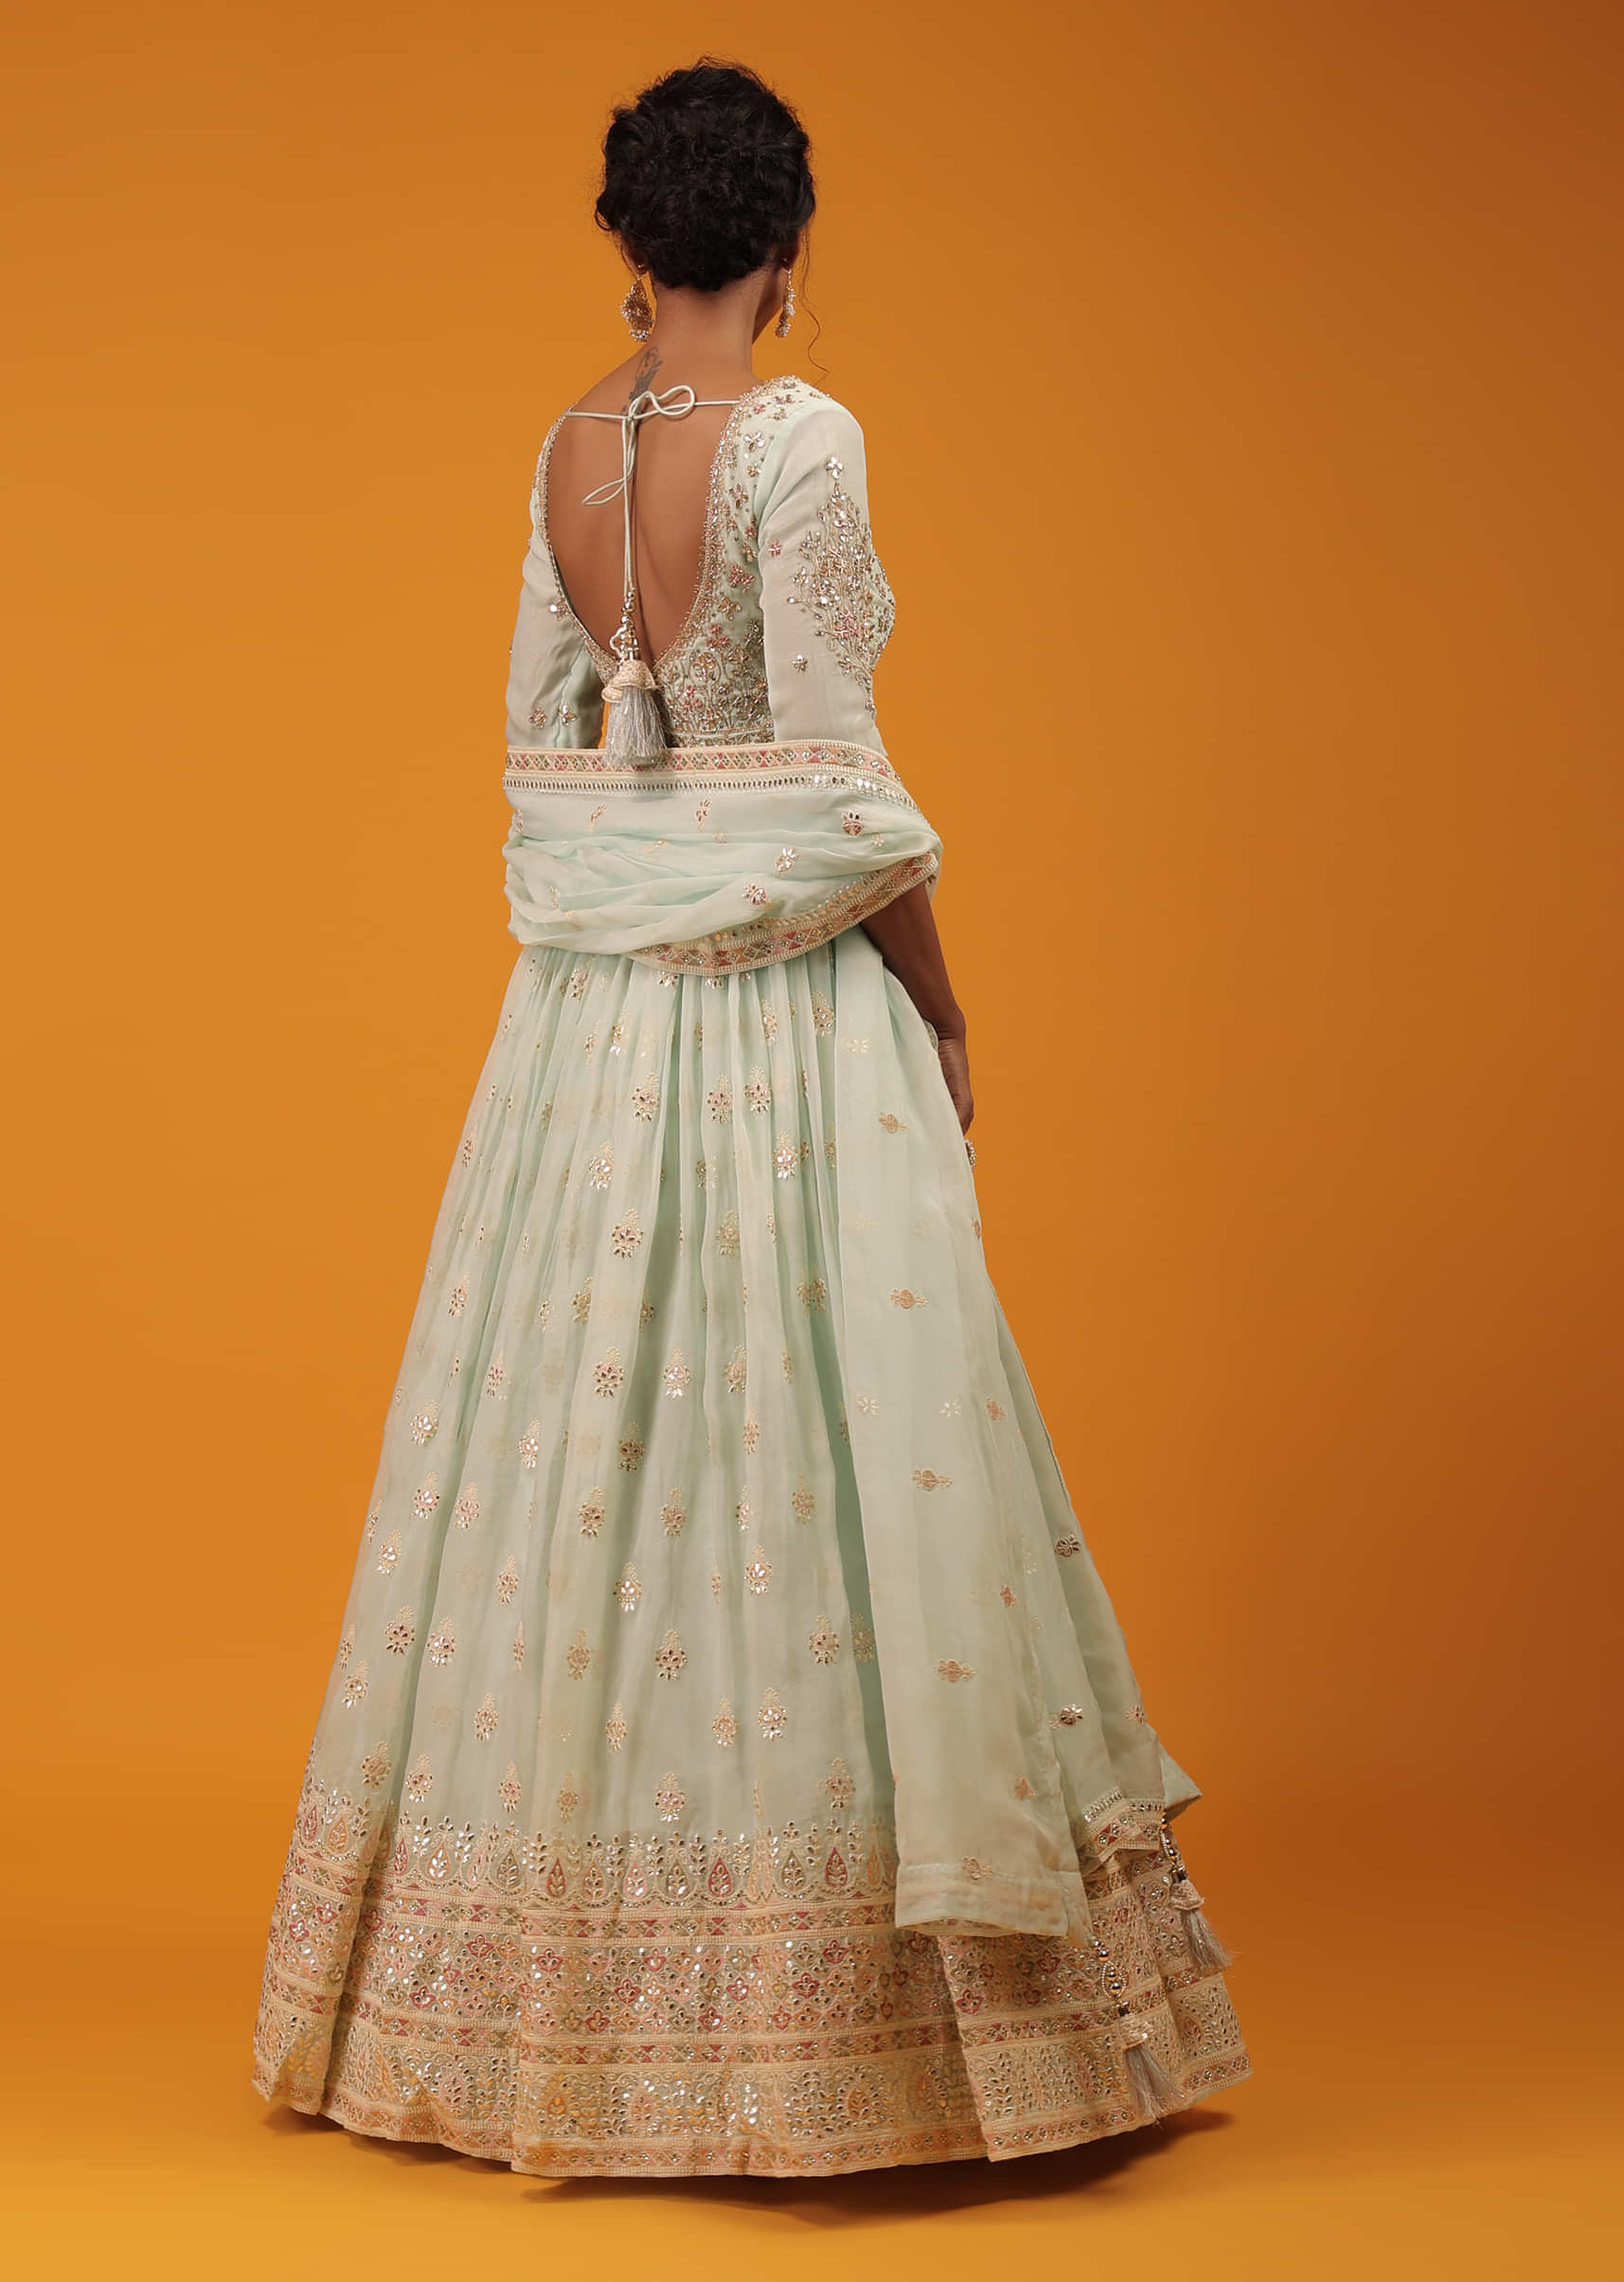 Honeydew Green Lehenga And Crop Top With Multi Colored Lucknowi Work In Floral Pattern